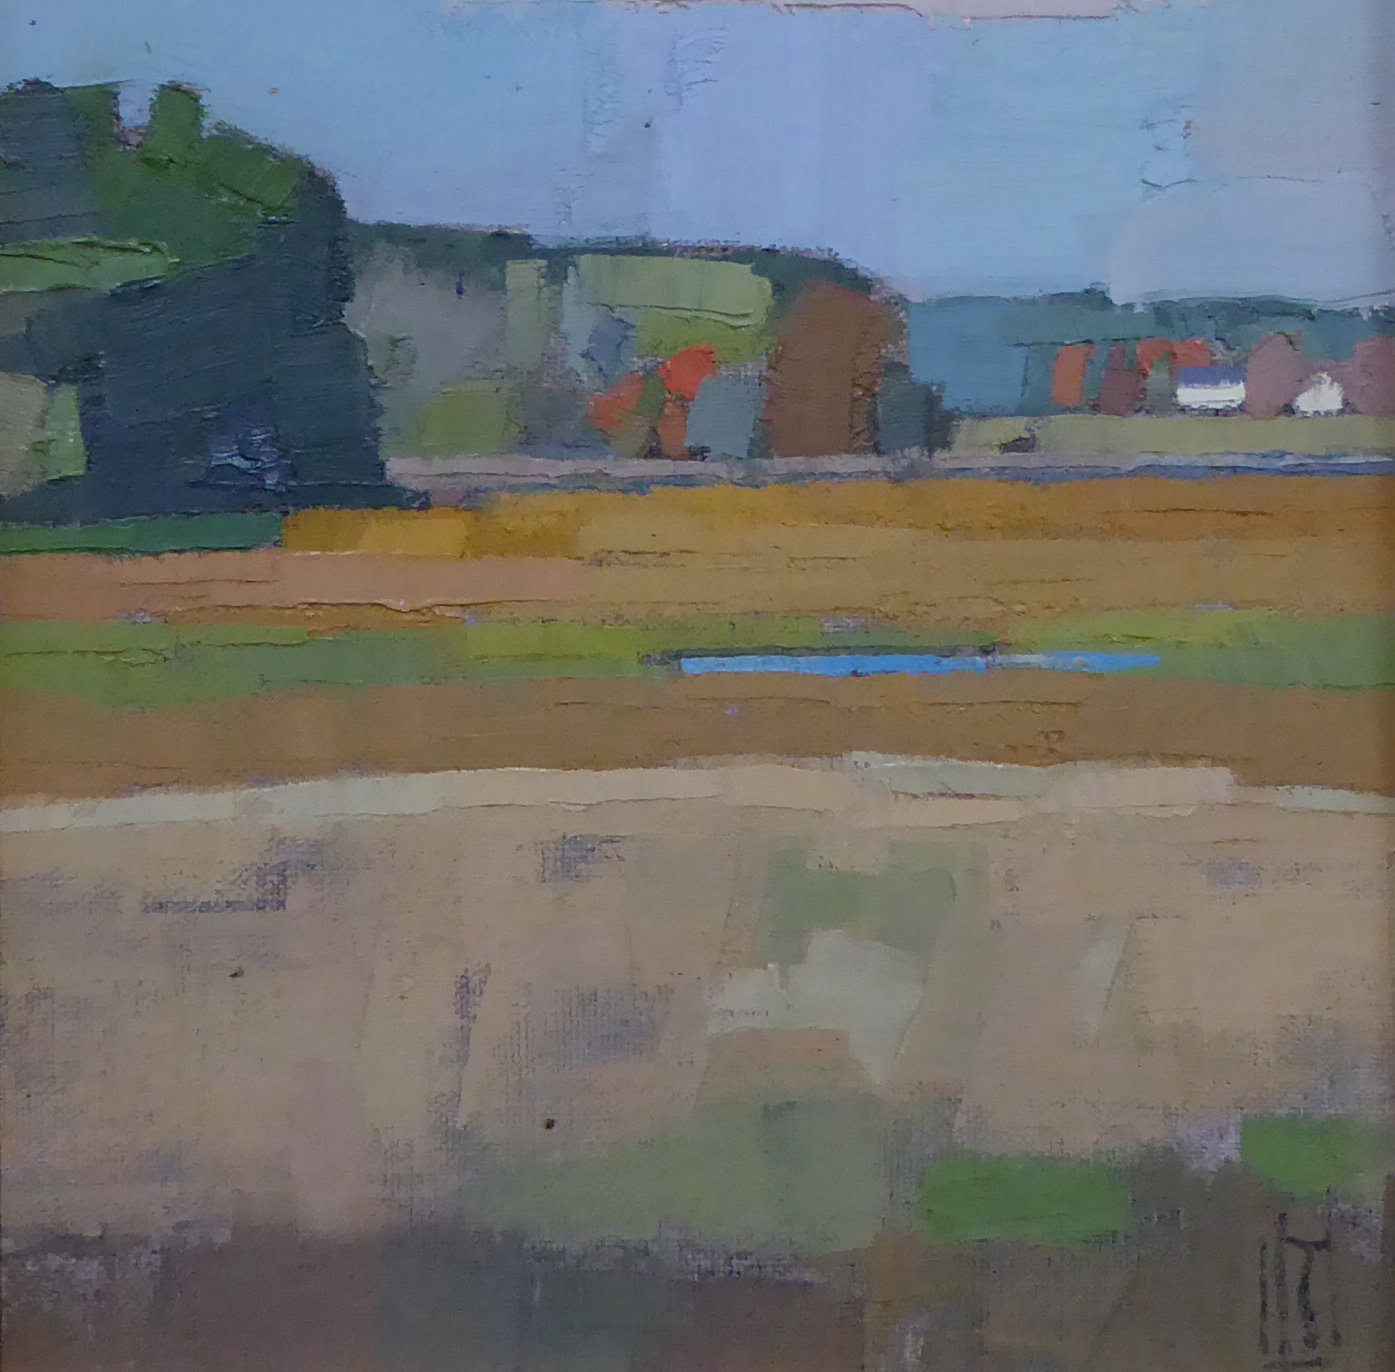  Newbury Marshes 8 x 8  sold  South Street Gallery 